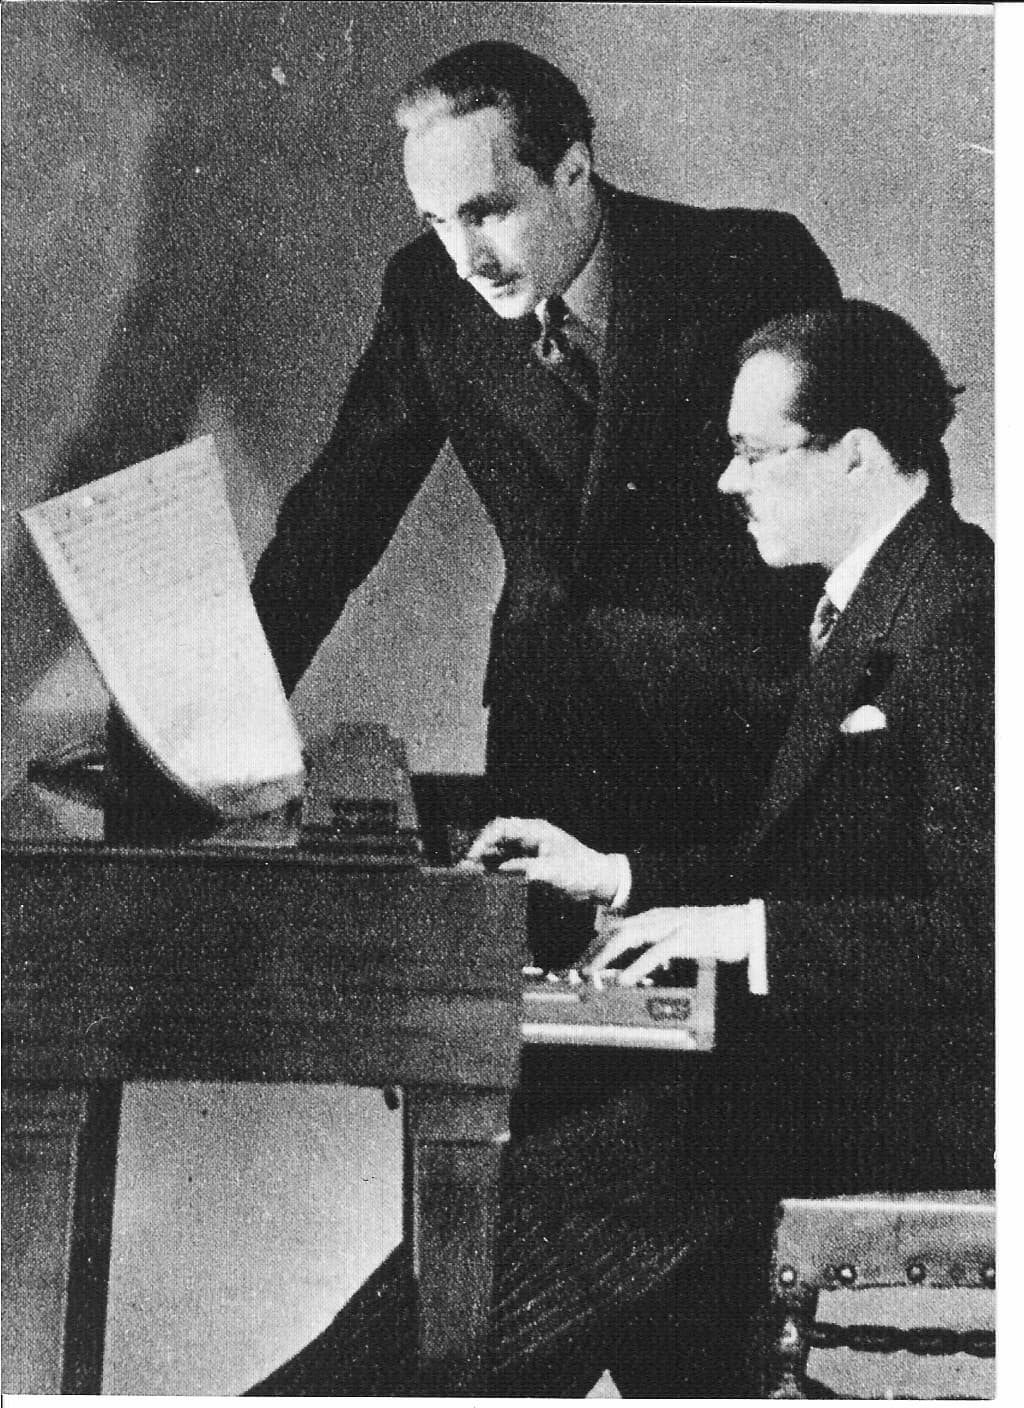 Vellones and Maurice Martenot